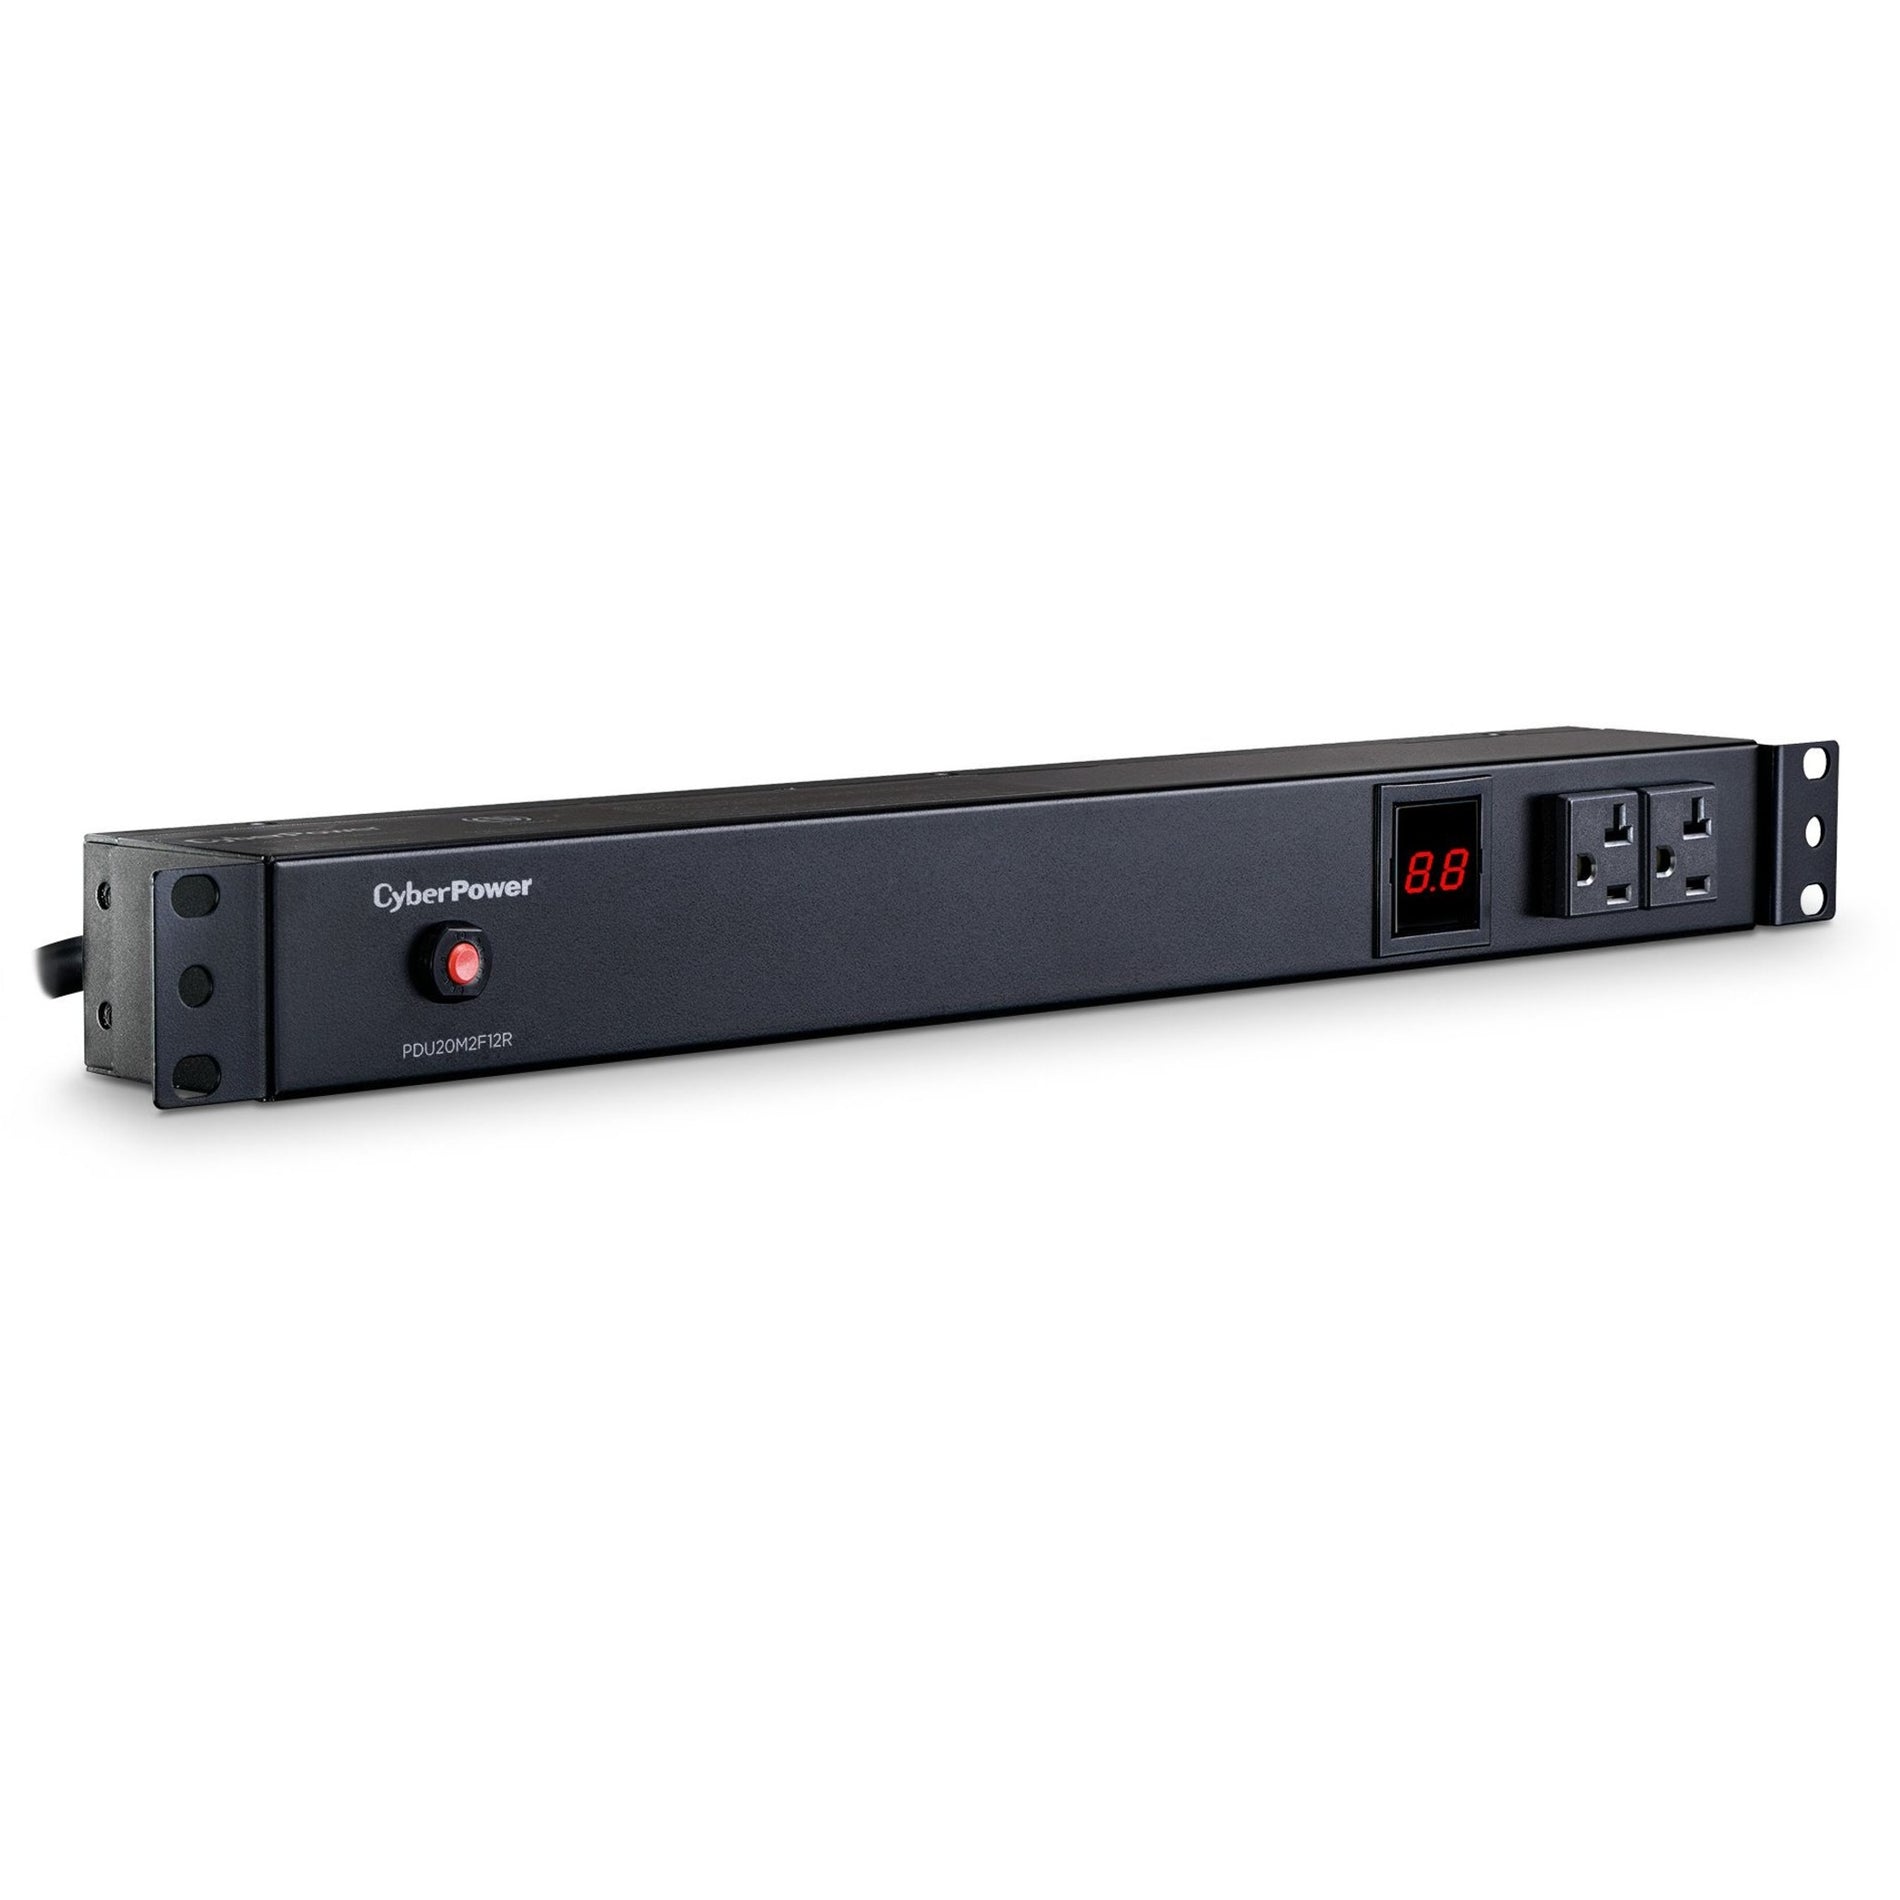 CyberPower PDU20M2F12R Metered PDU, 14-Outlets, 20A, 100-125V AC